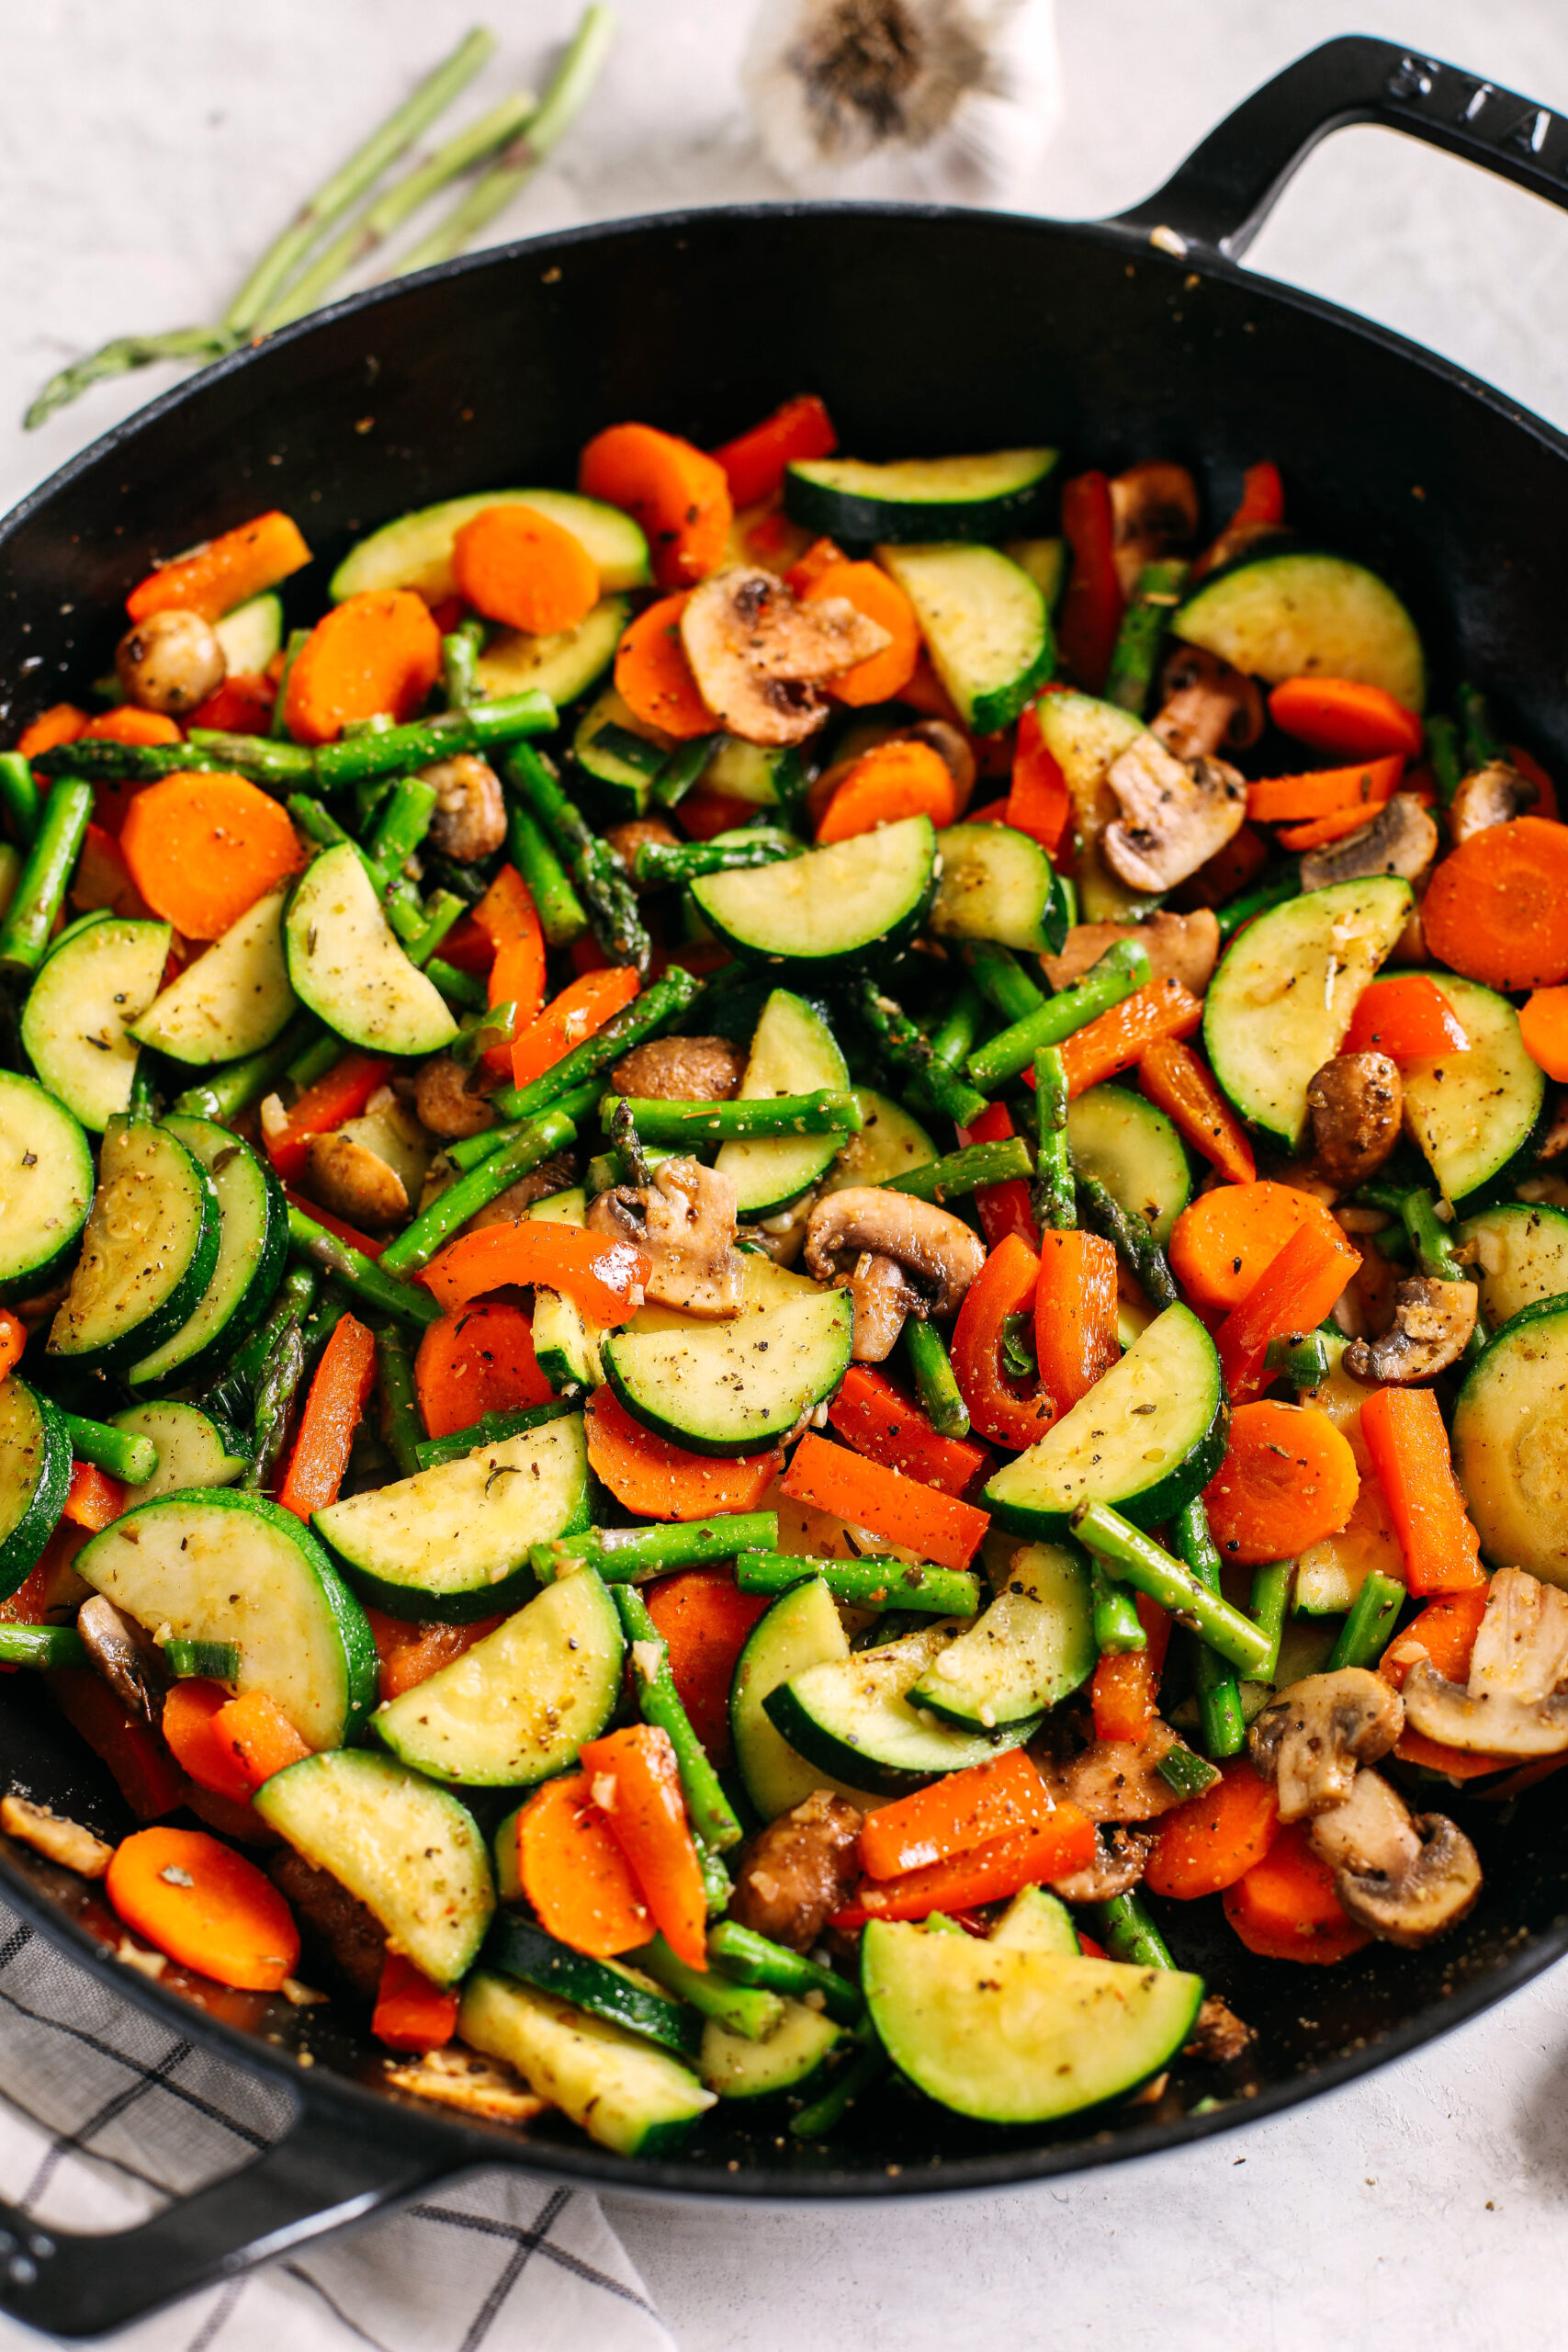 These flavorful Simple Sautéed Vegetables make the perfect healthy side dish that are seasoned to perfection and easily made in just 20 minutes!